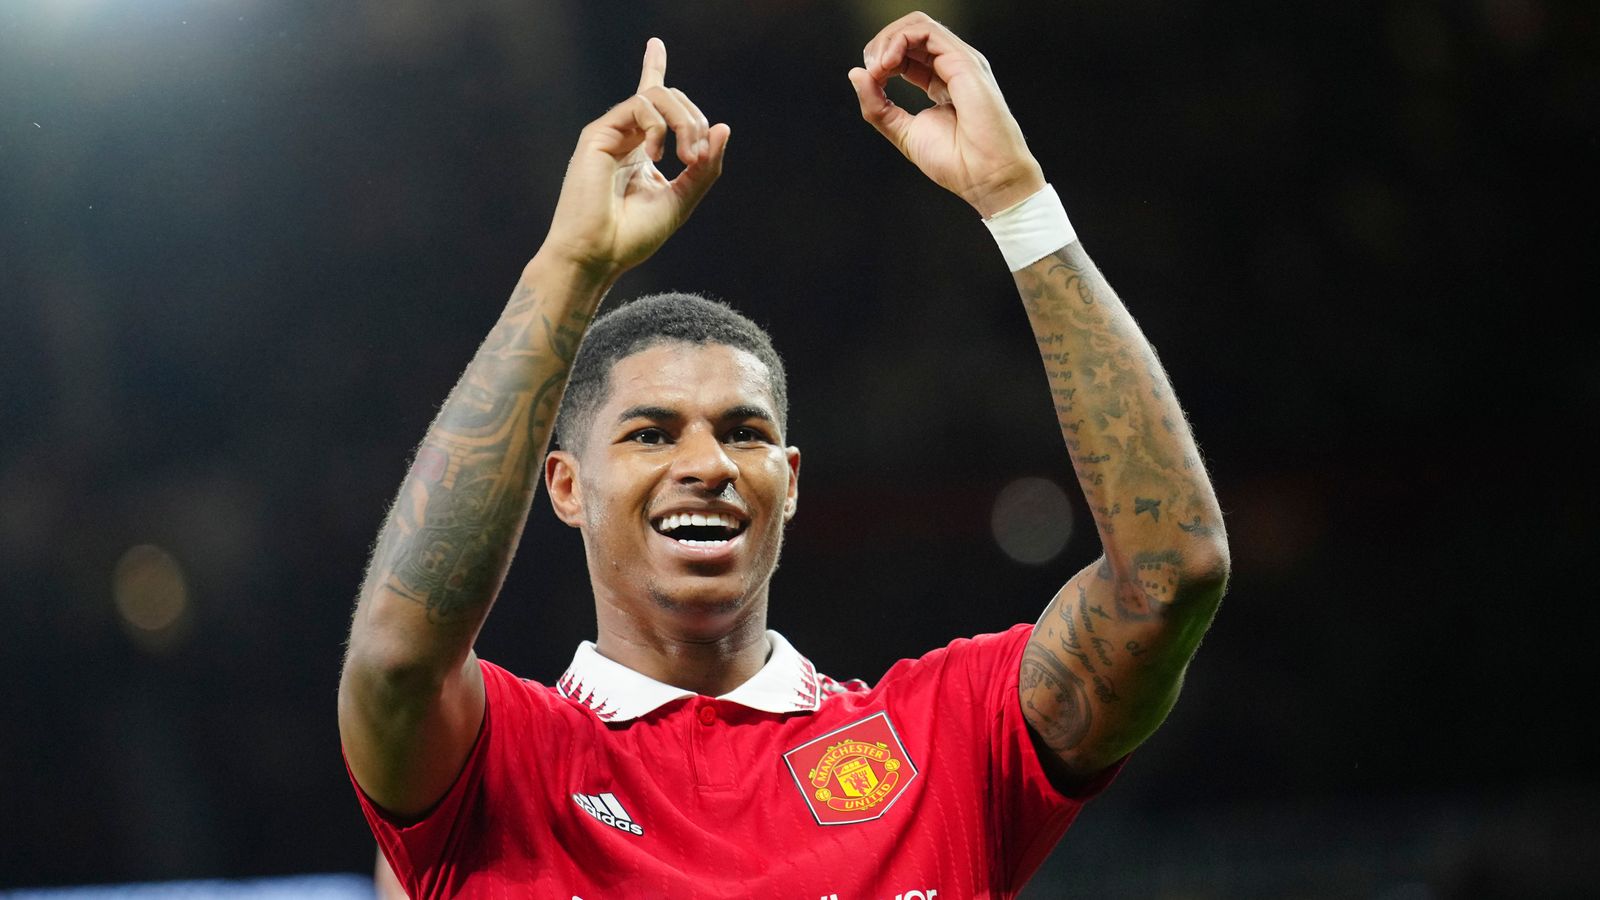 marcus-rashford-admits-he-wasn-t-in-right-headspace-after-hitting-century-of-man-utd-goals